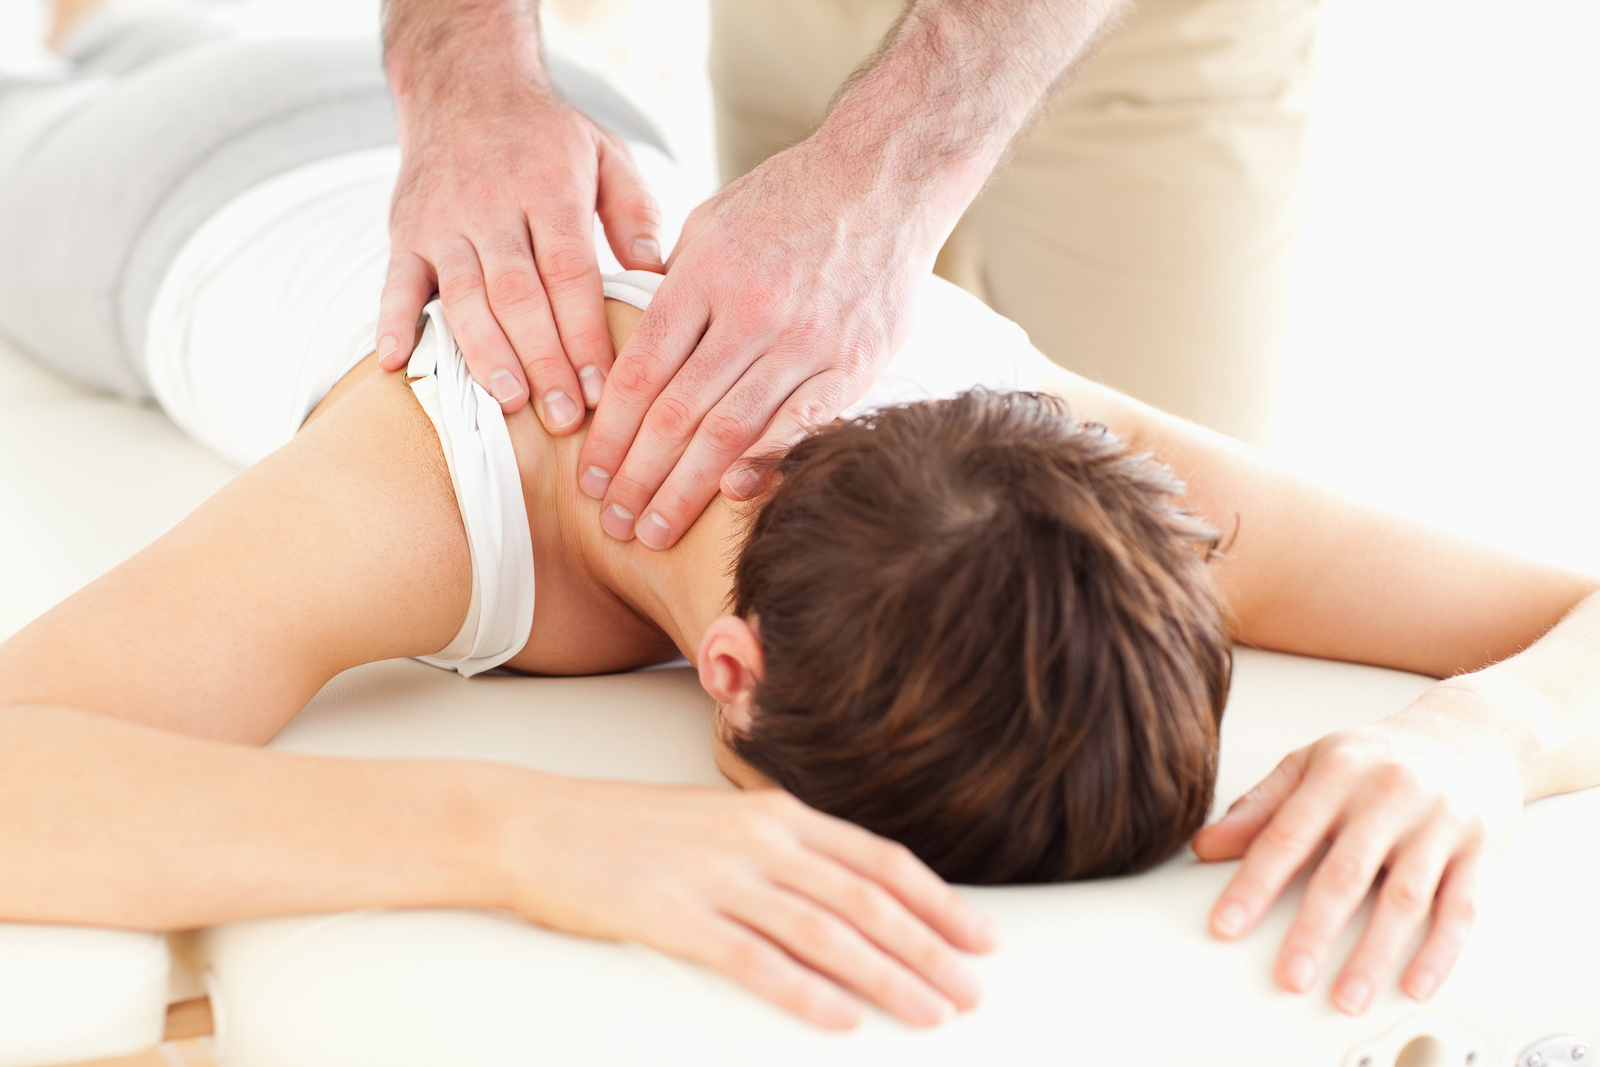 Woman with neck pain getting chiropractic care.